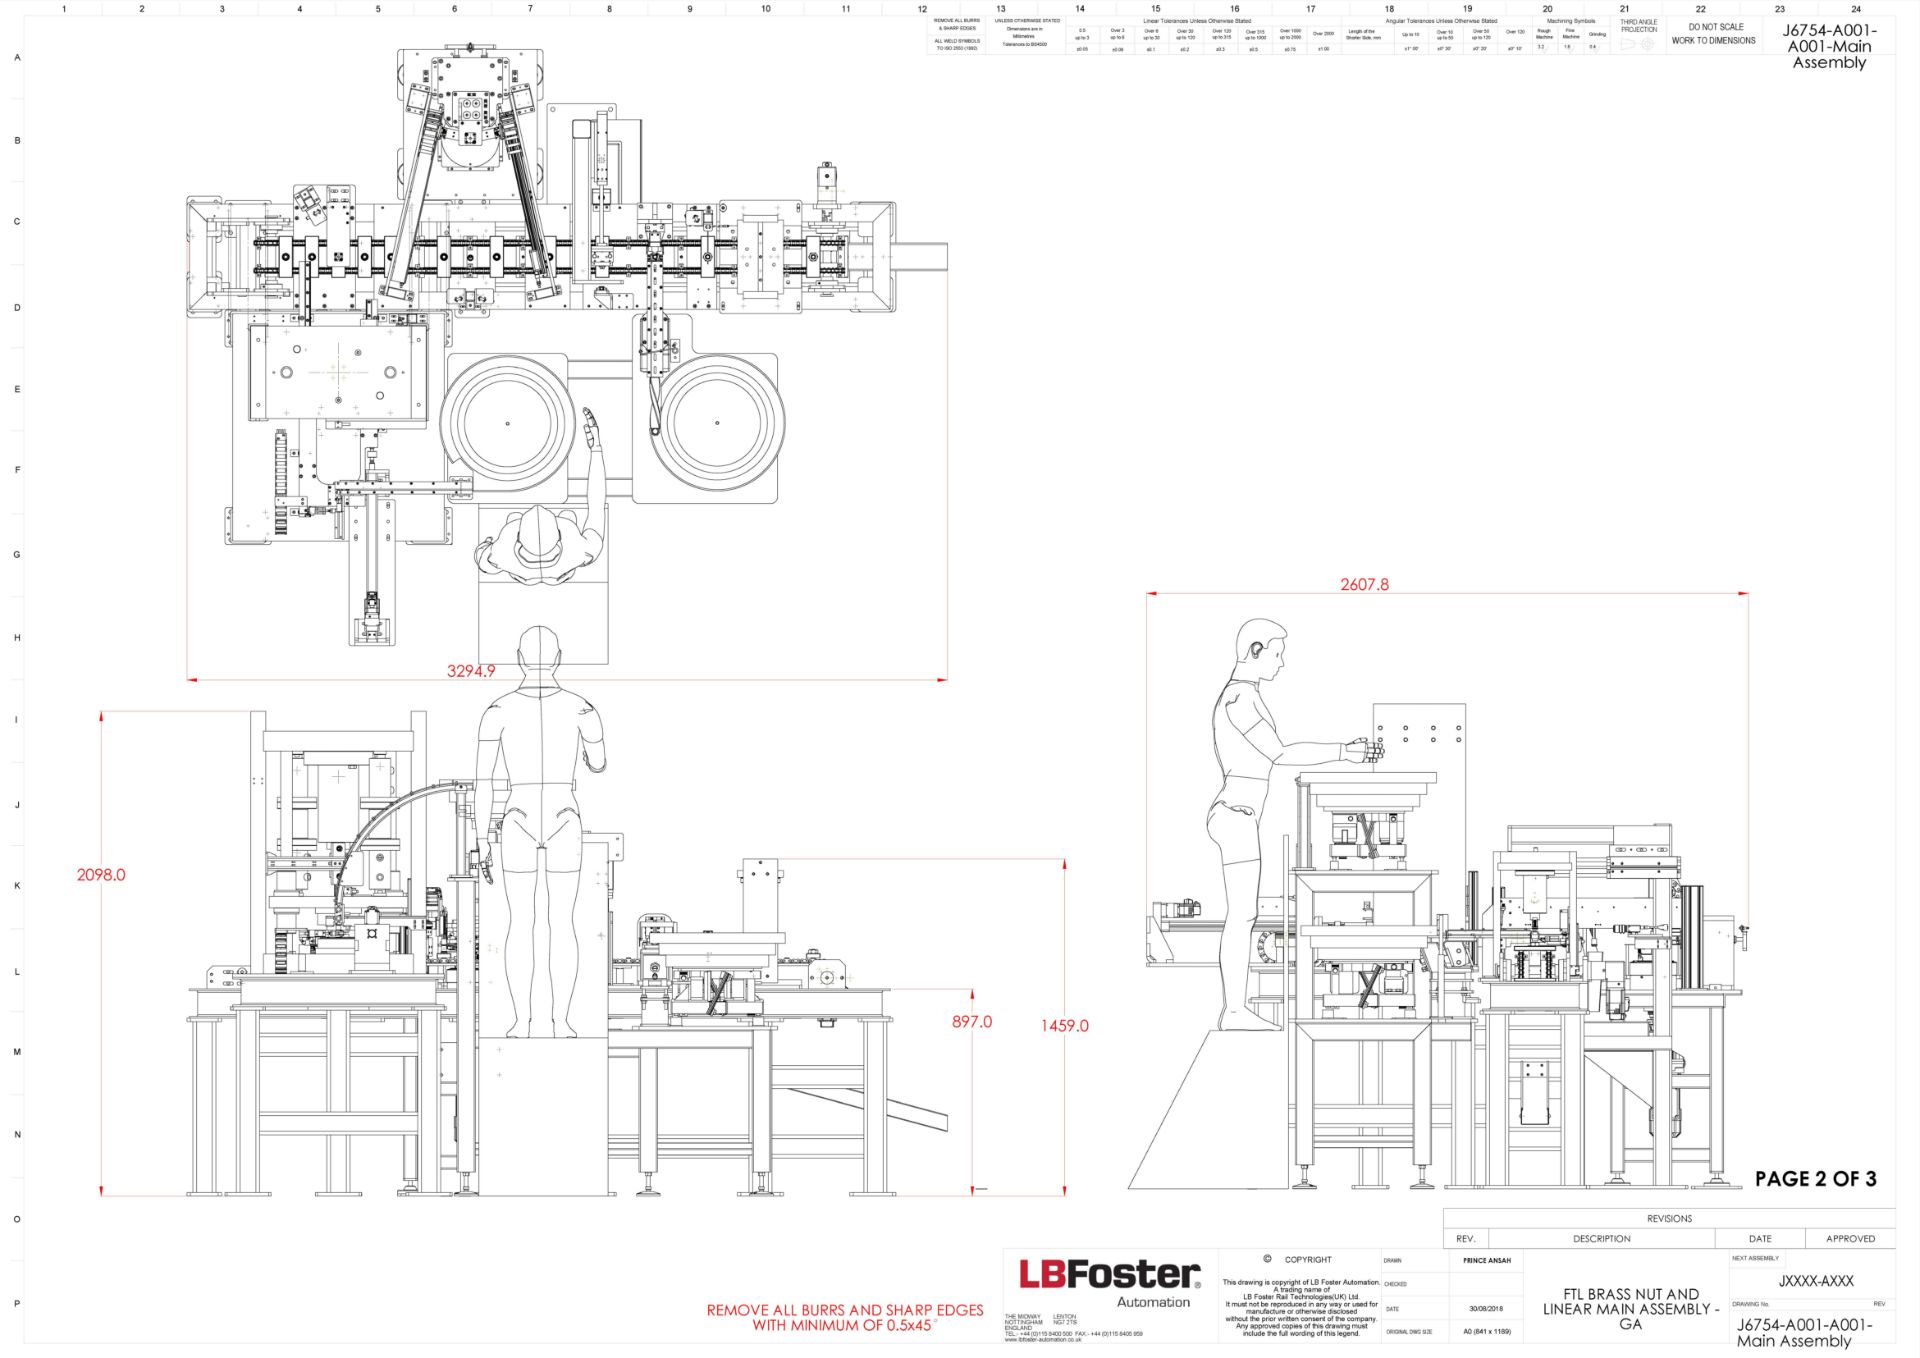 LB Foster Automation Brass Nut and Liner Forming Machine (2019), Serial Number 001 - Image 12 of 17